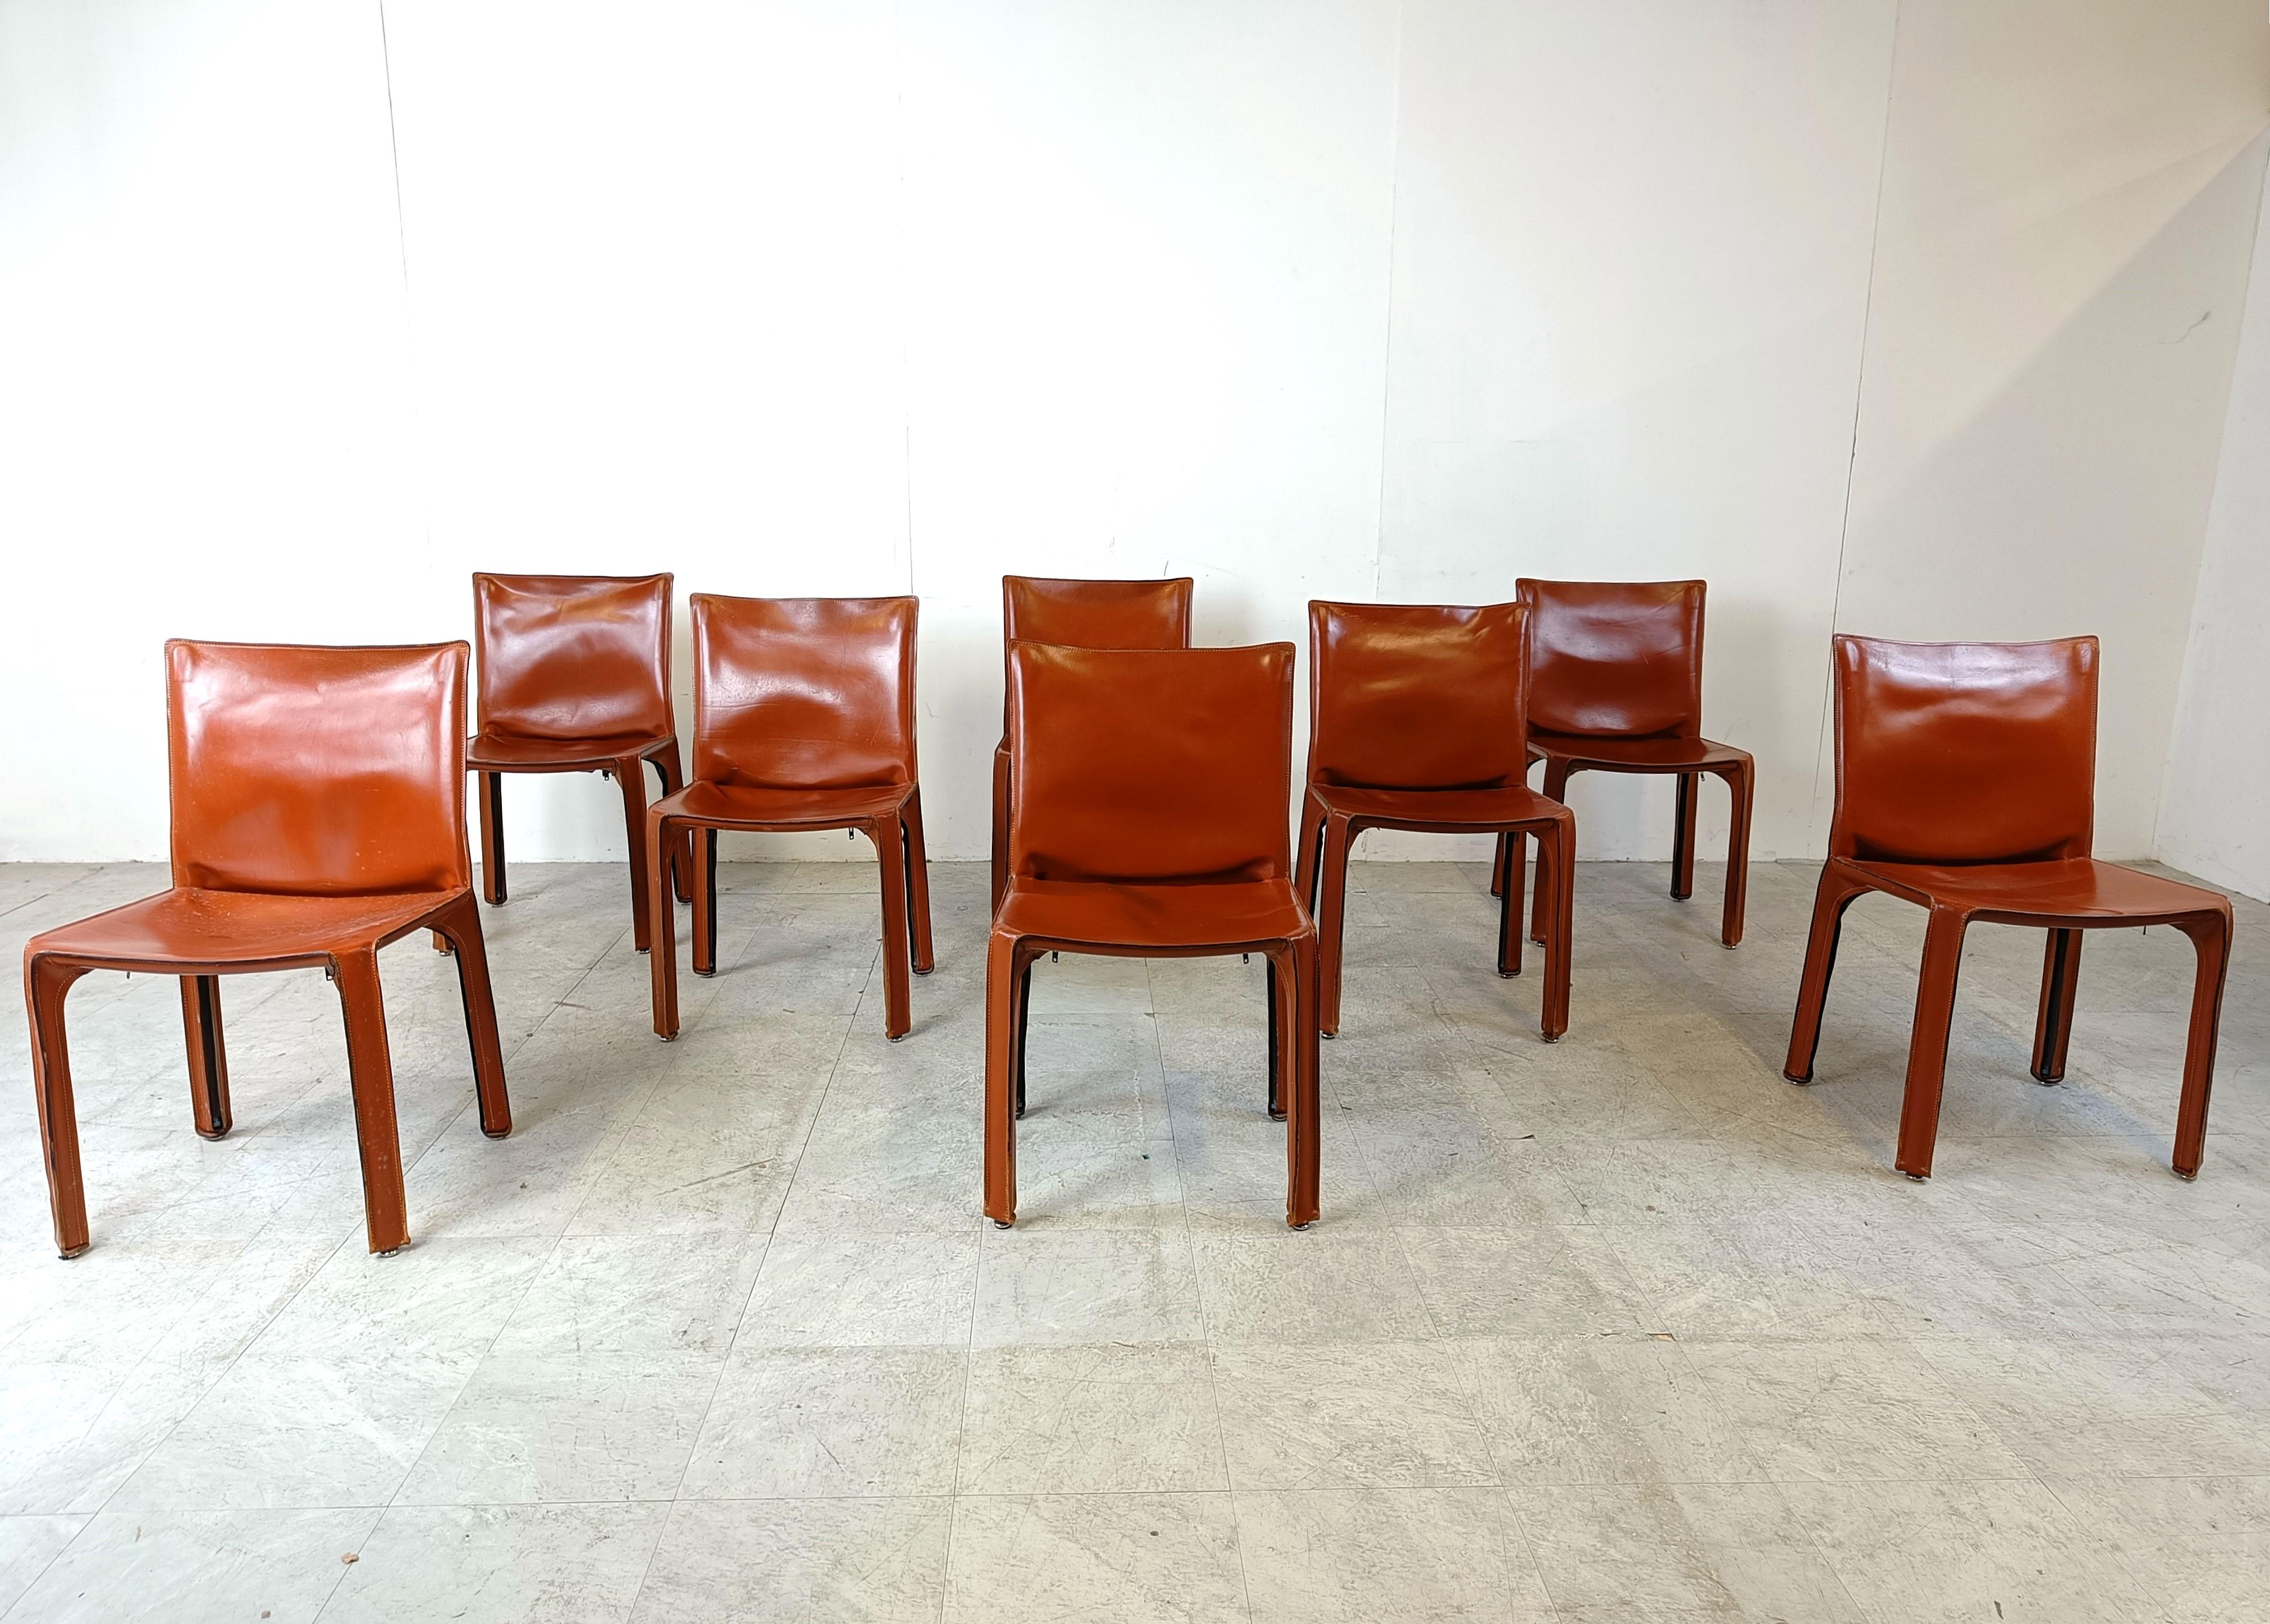 Italian Red leather dining chairs Italy, 1970s - set of 8